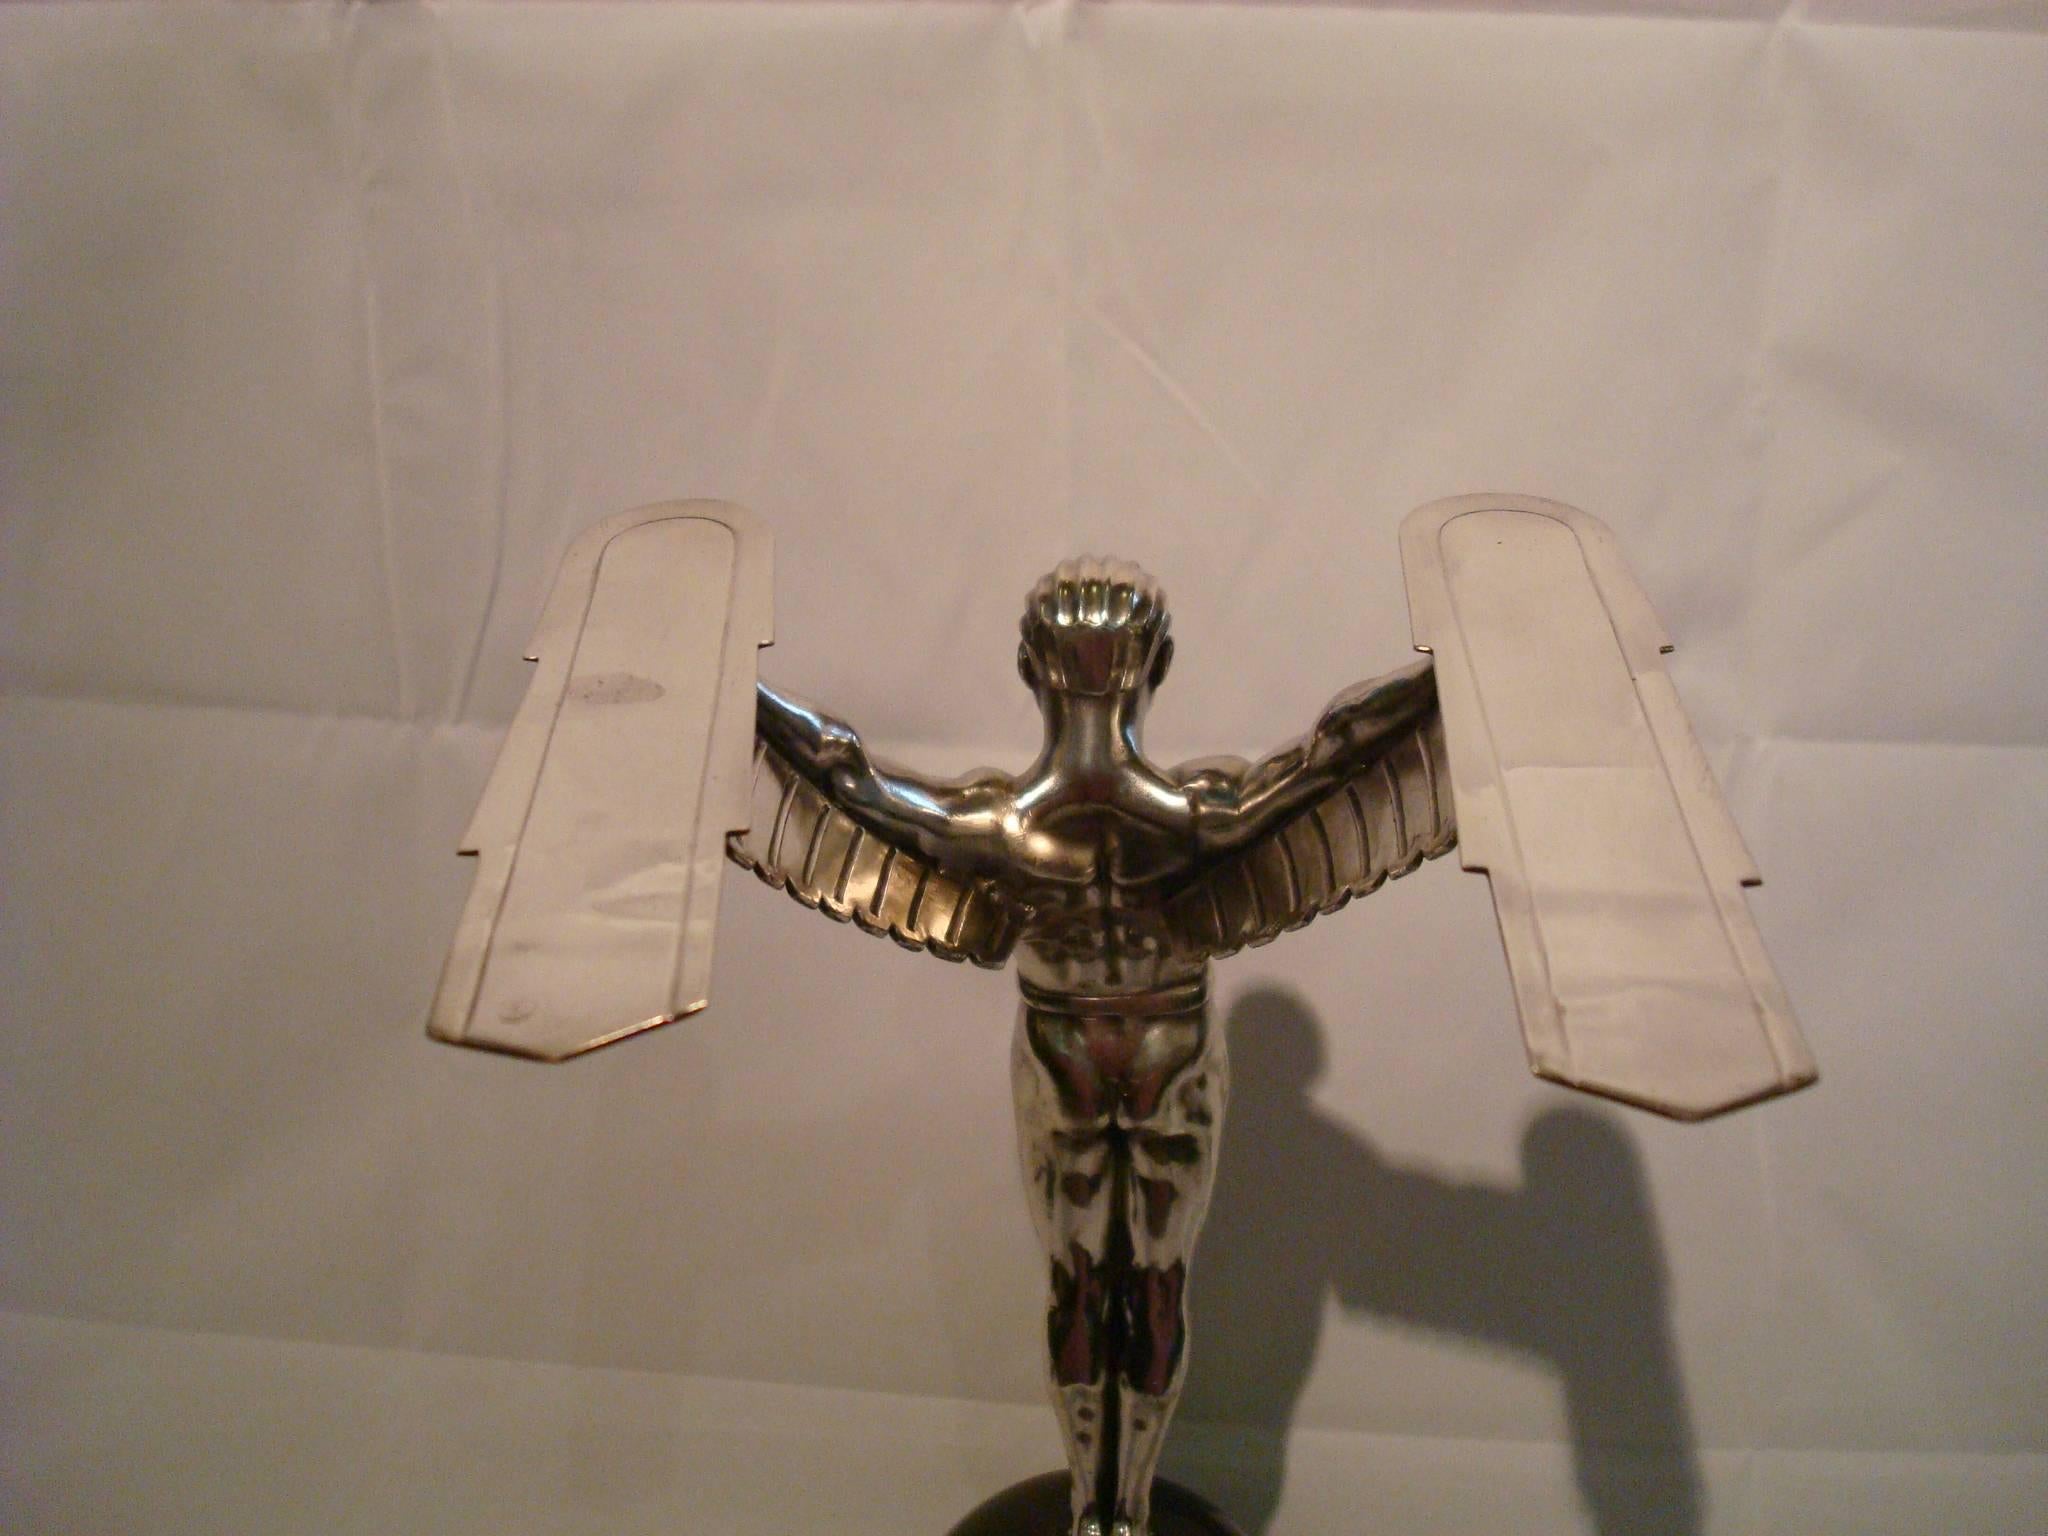 German Icarus, an Art Deco Sculpture of a Winged Male Nude Attributed to Schmidt Hofer